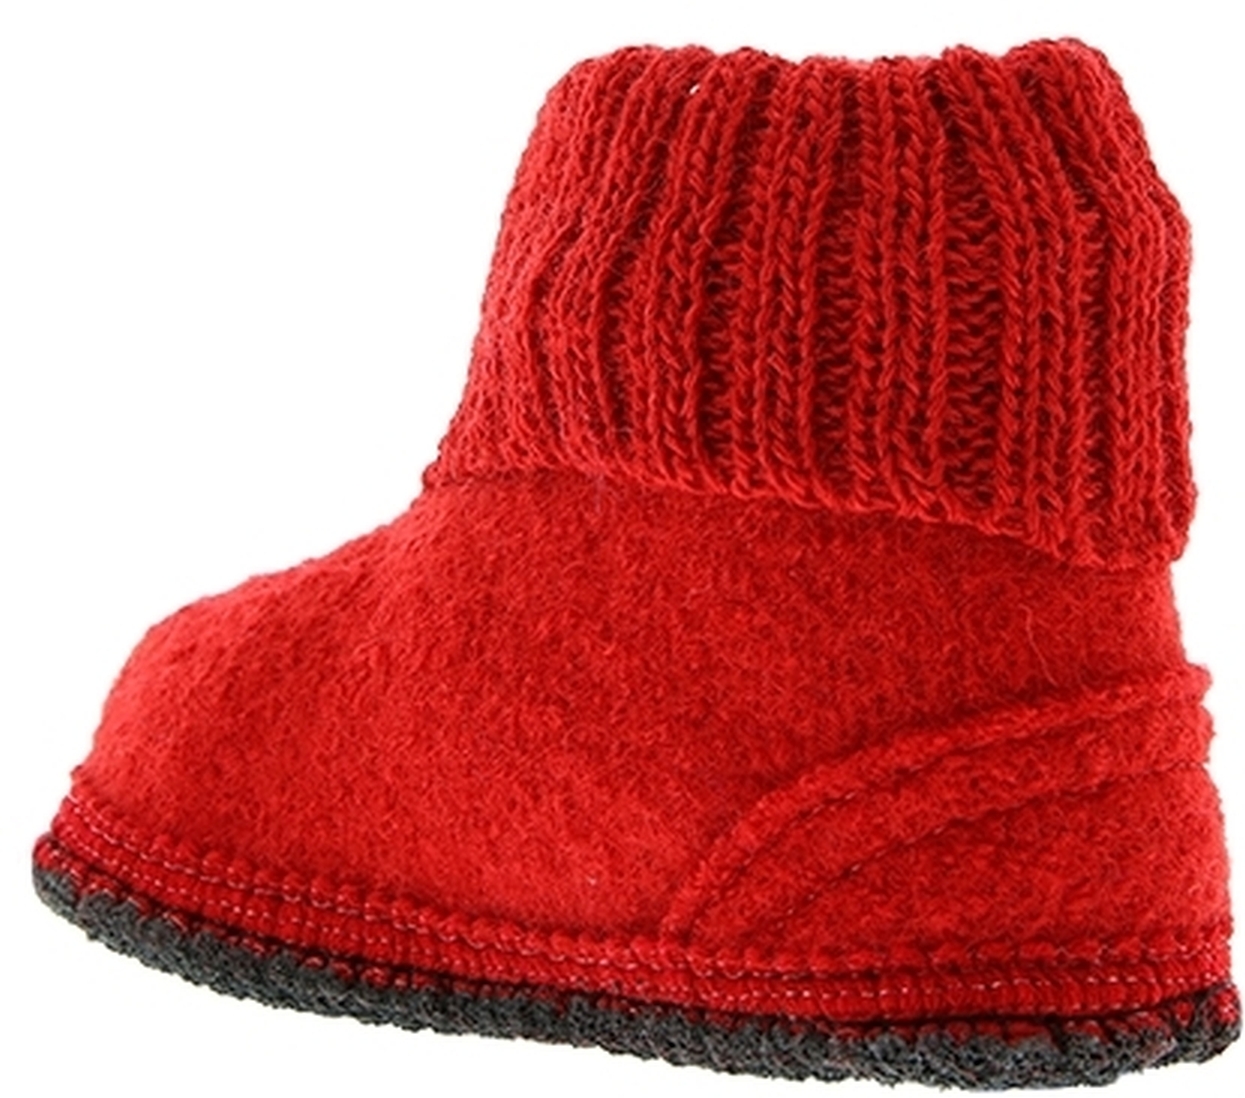 Bergstein Cozy Red Wool